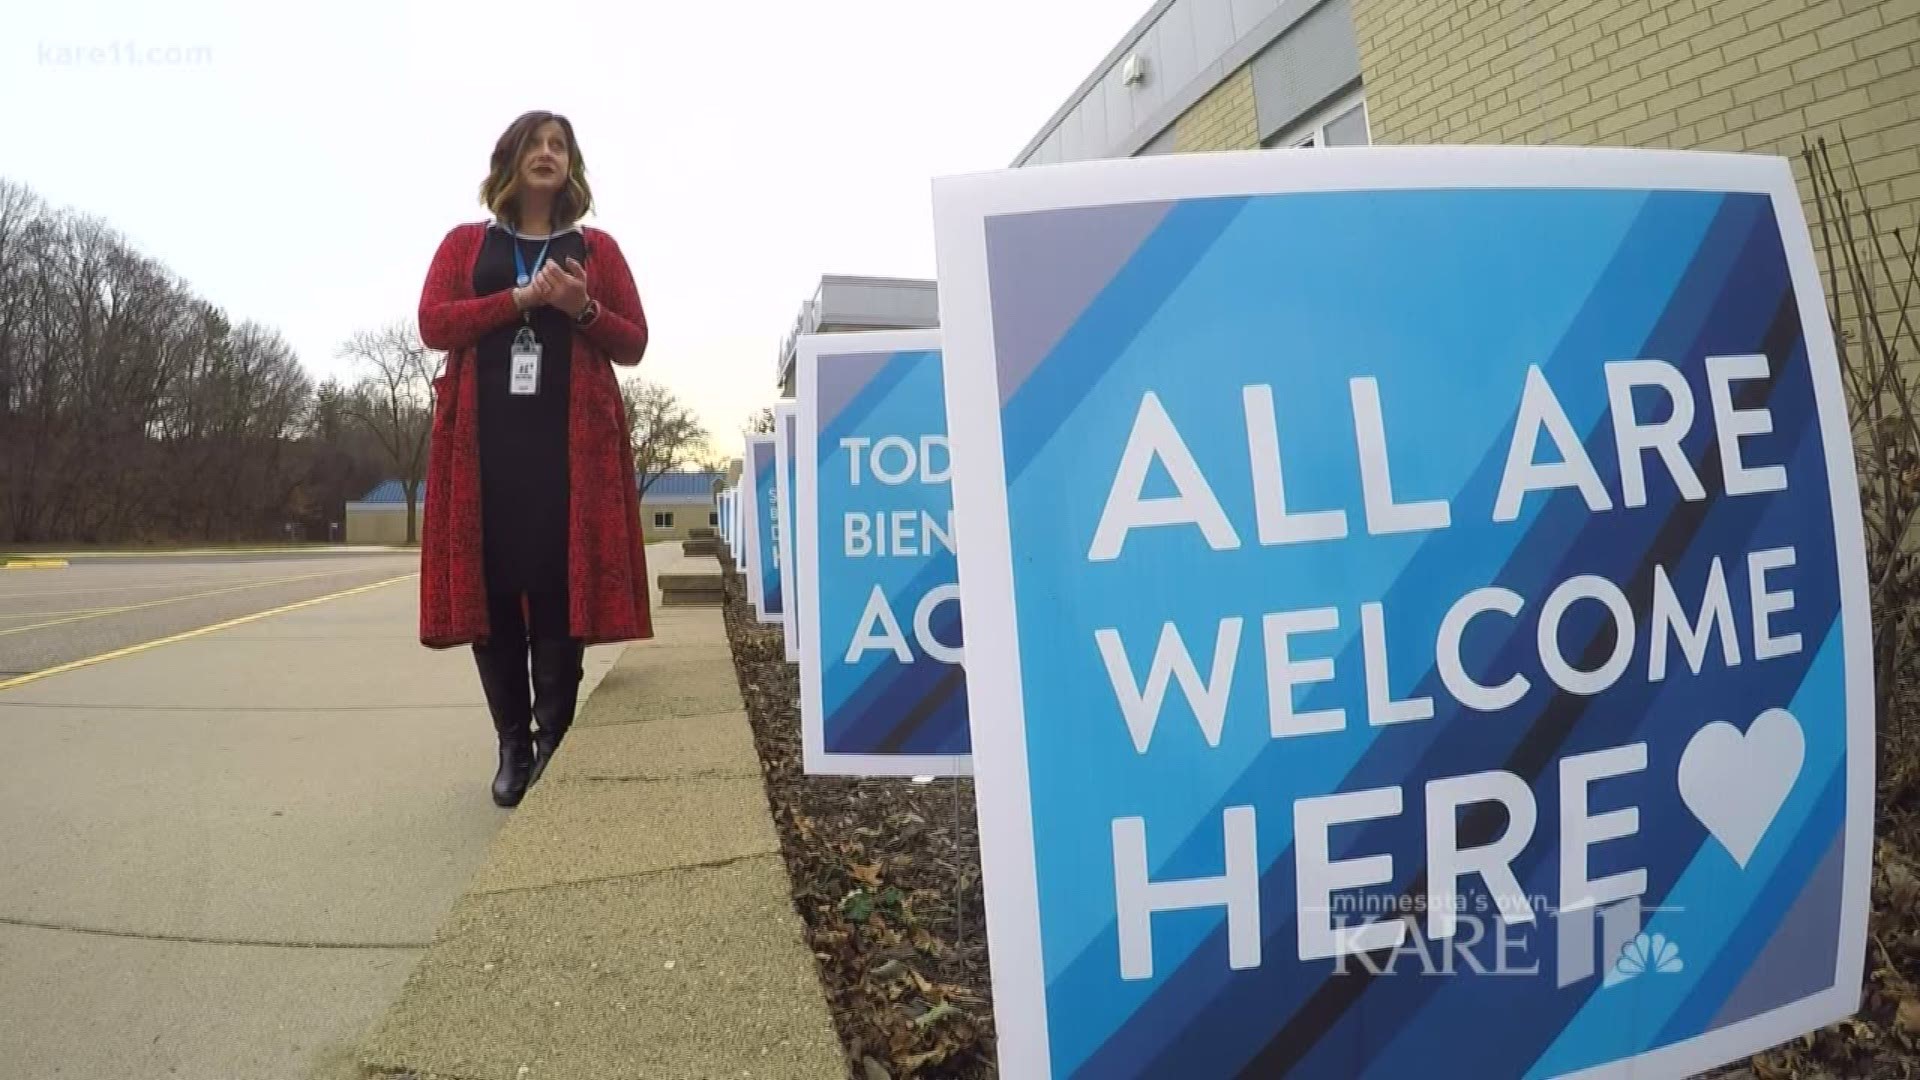 The story behind the 'All Are Welcome Here' signs